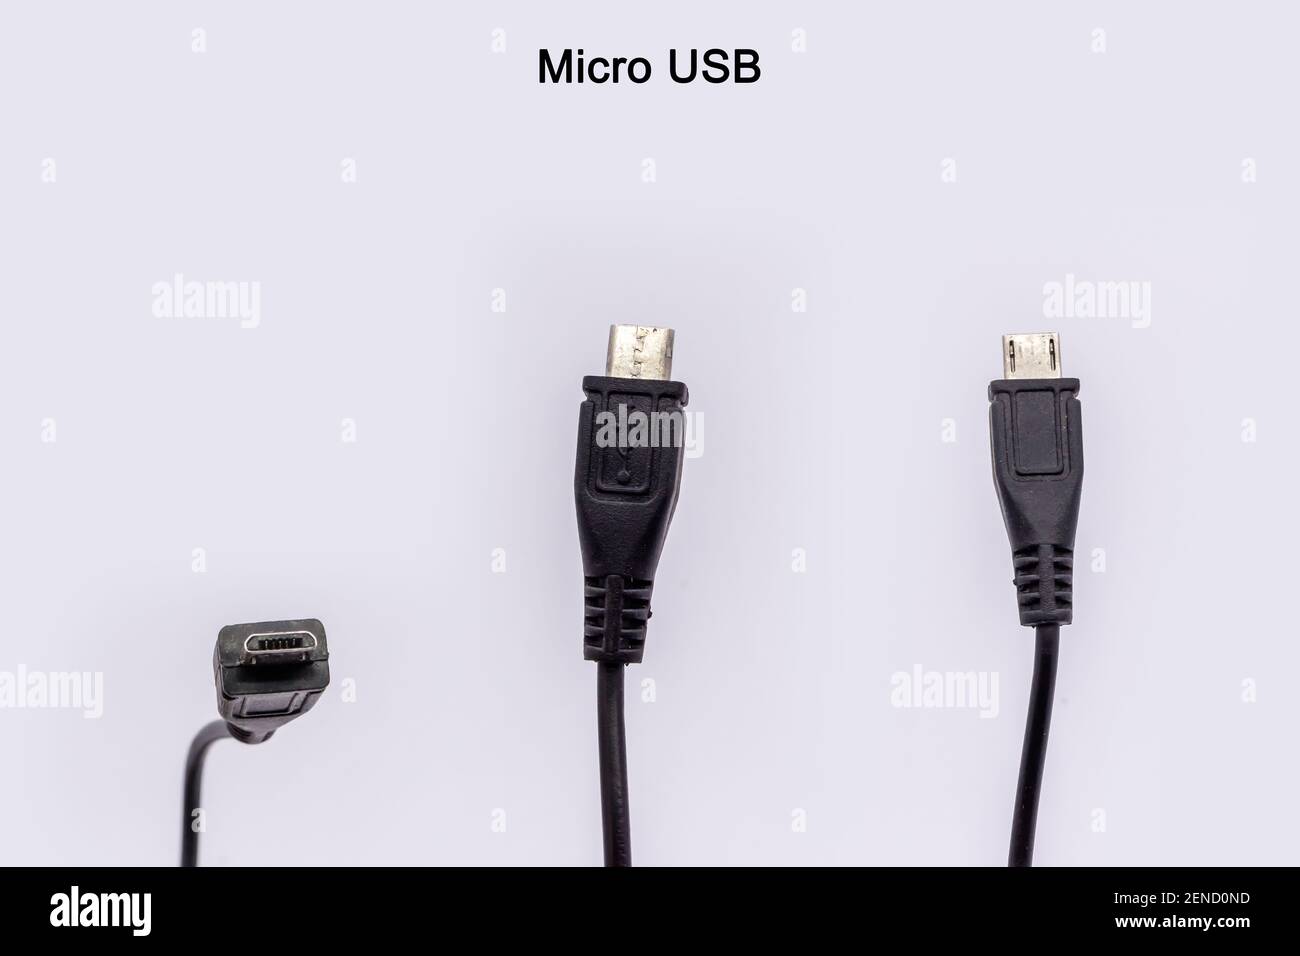 Micro USB cable from different angles isolated against white background. Stock Photo